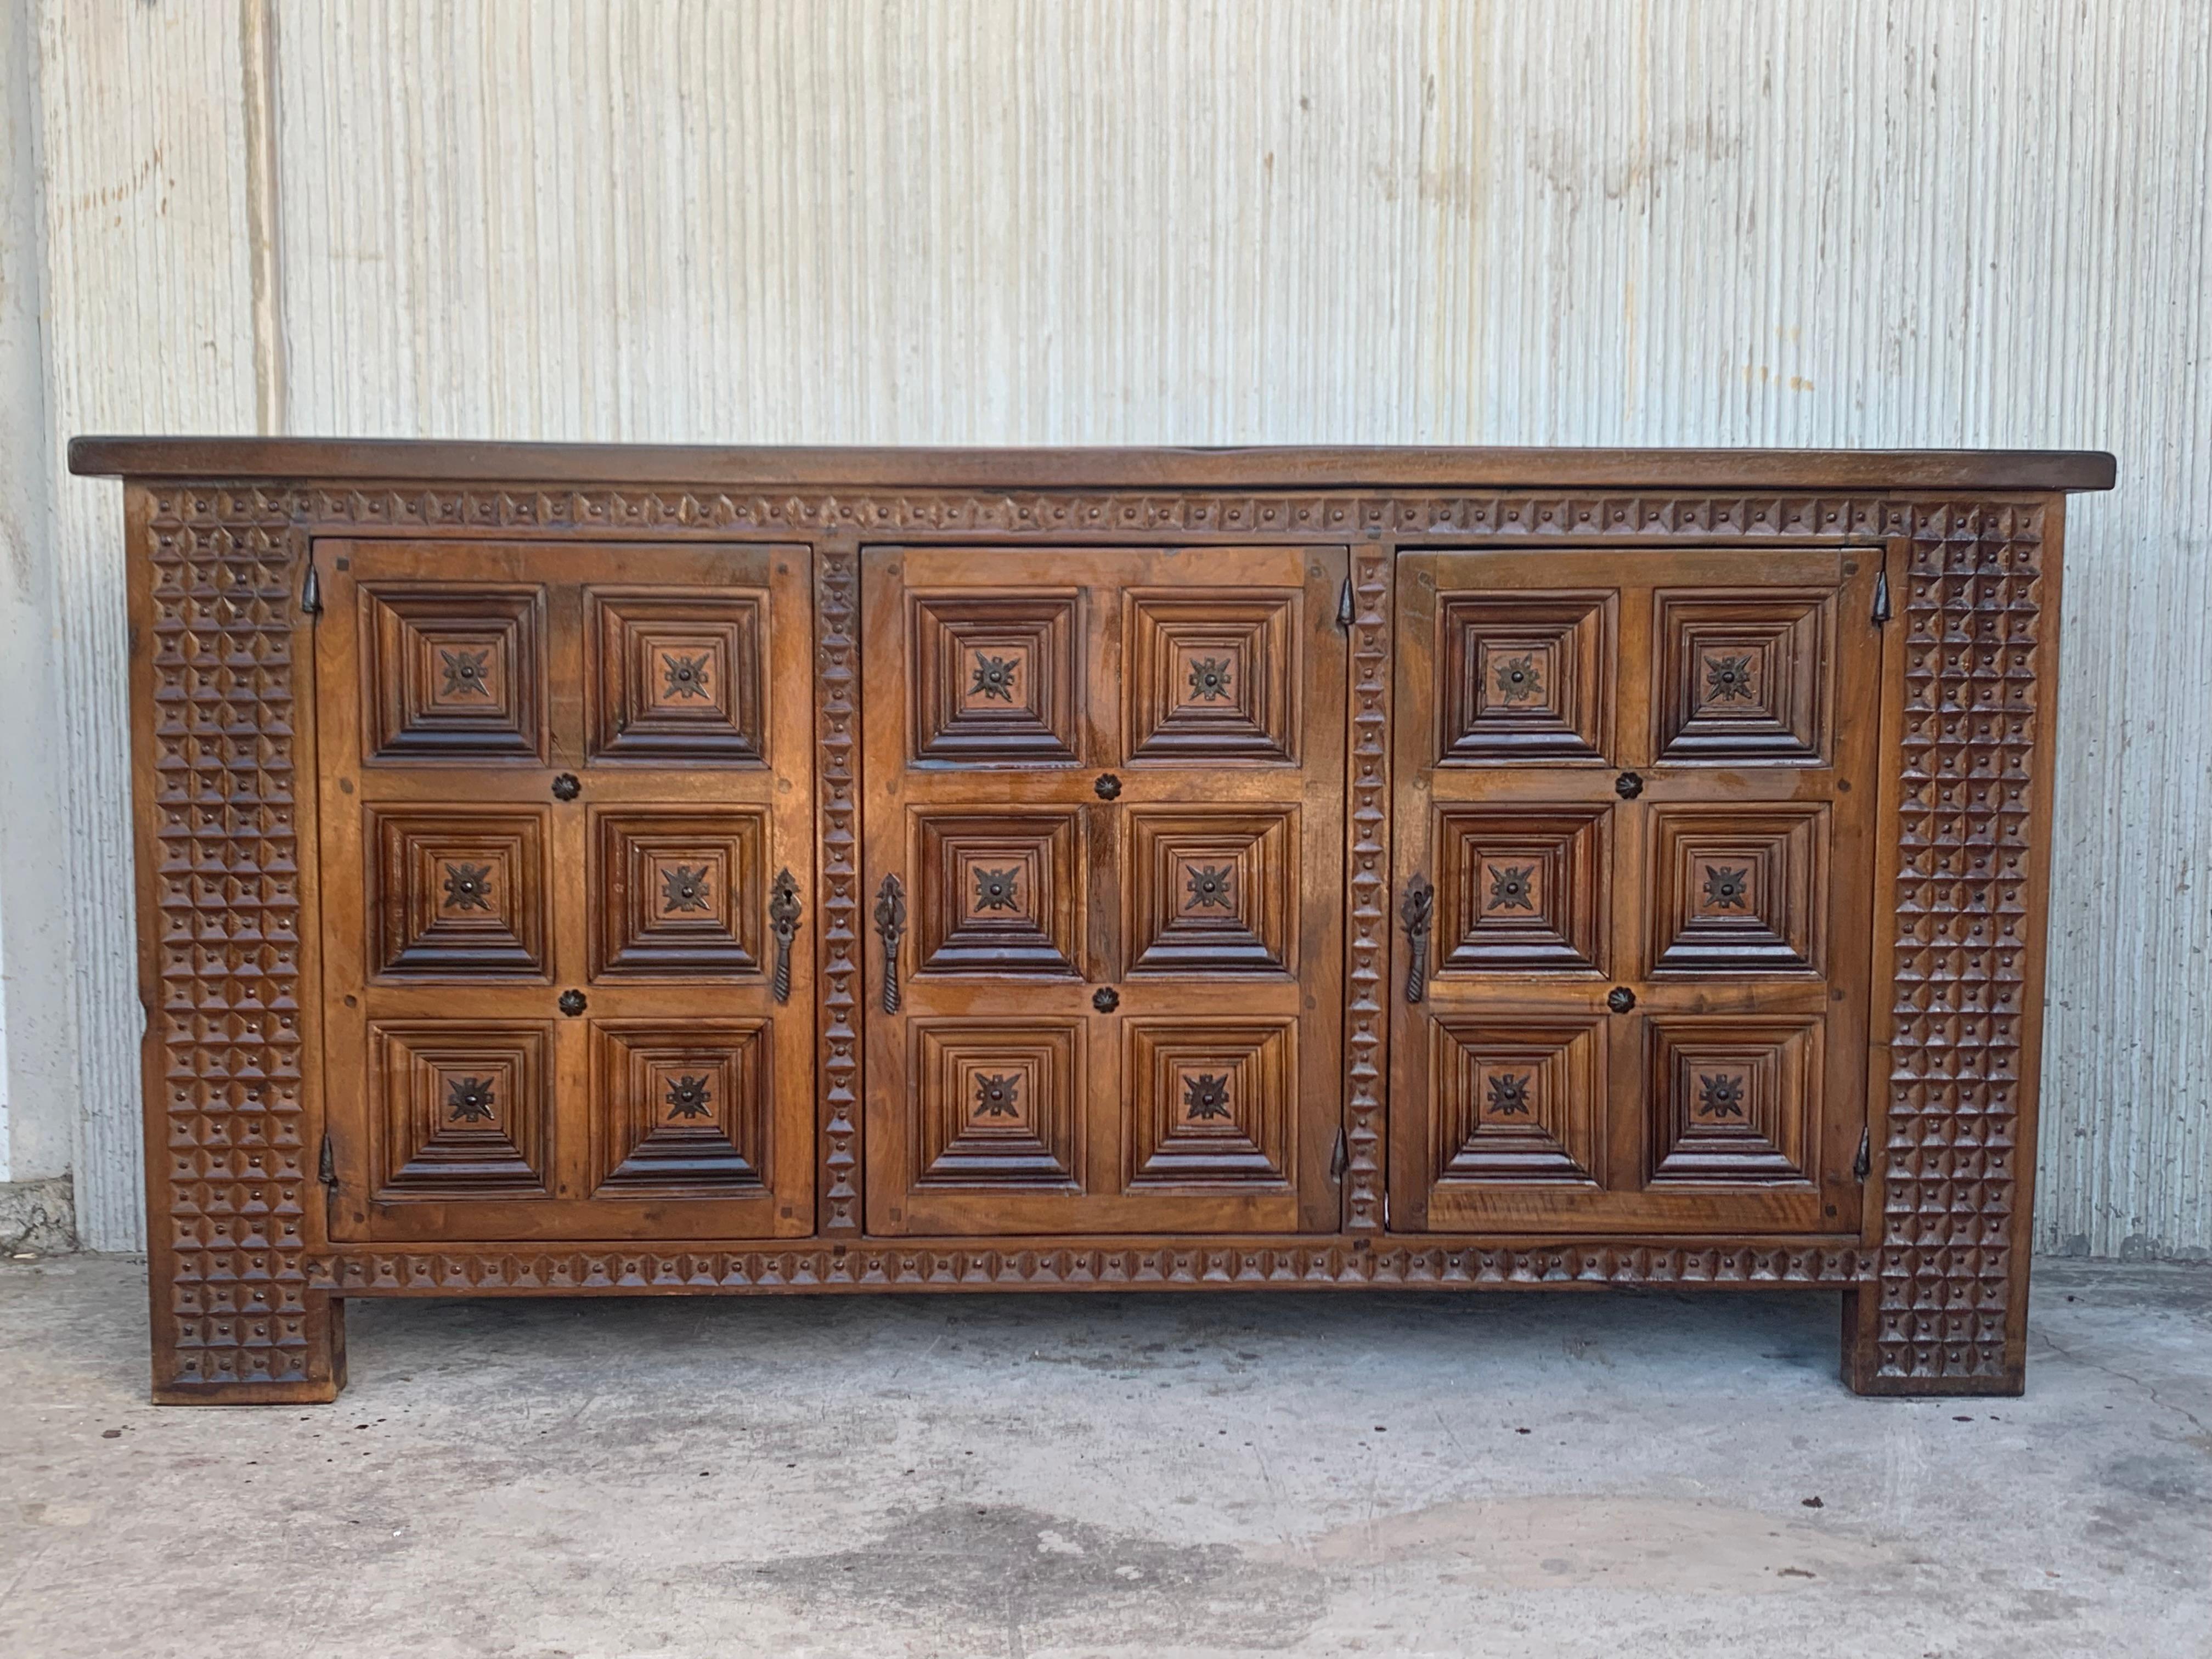 From Northern Spain, constructed of solid walnut, the rectangular top with molded edge atop a conforming case housing three doors, the doors paneled with solid walnut, raised on a plinth base. The doors are hand carved in the edges of the pieces.